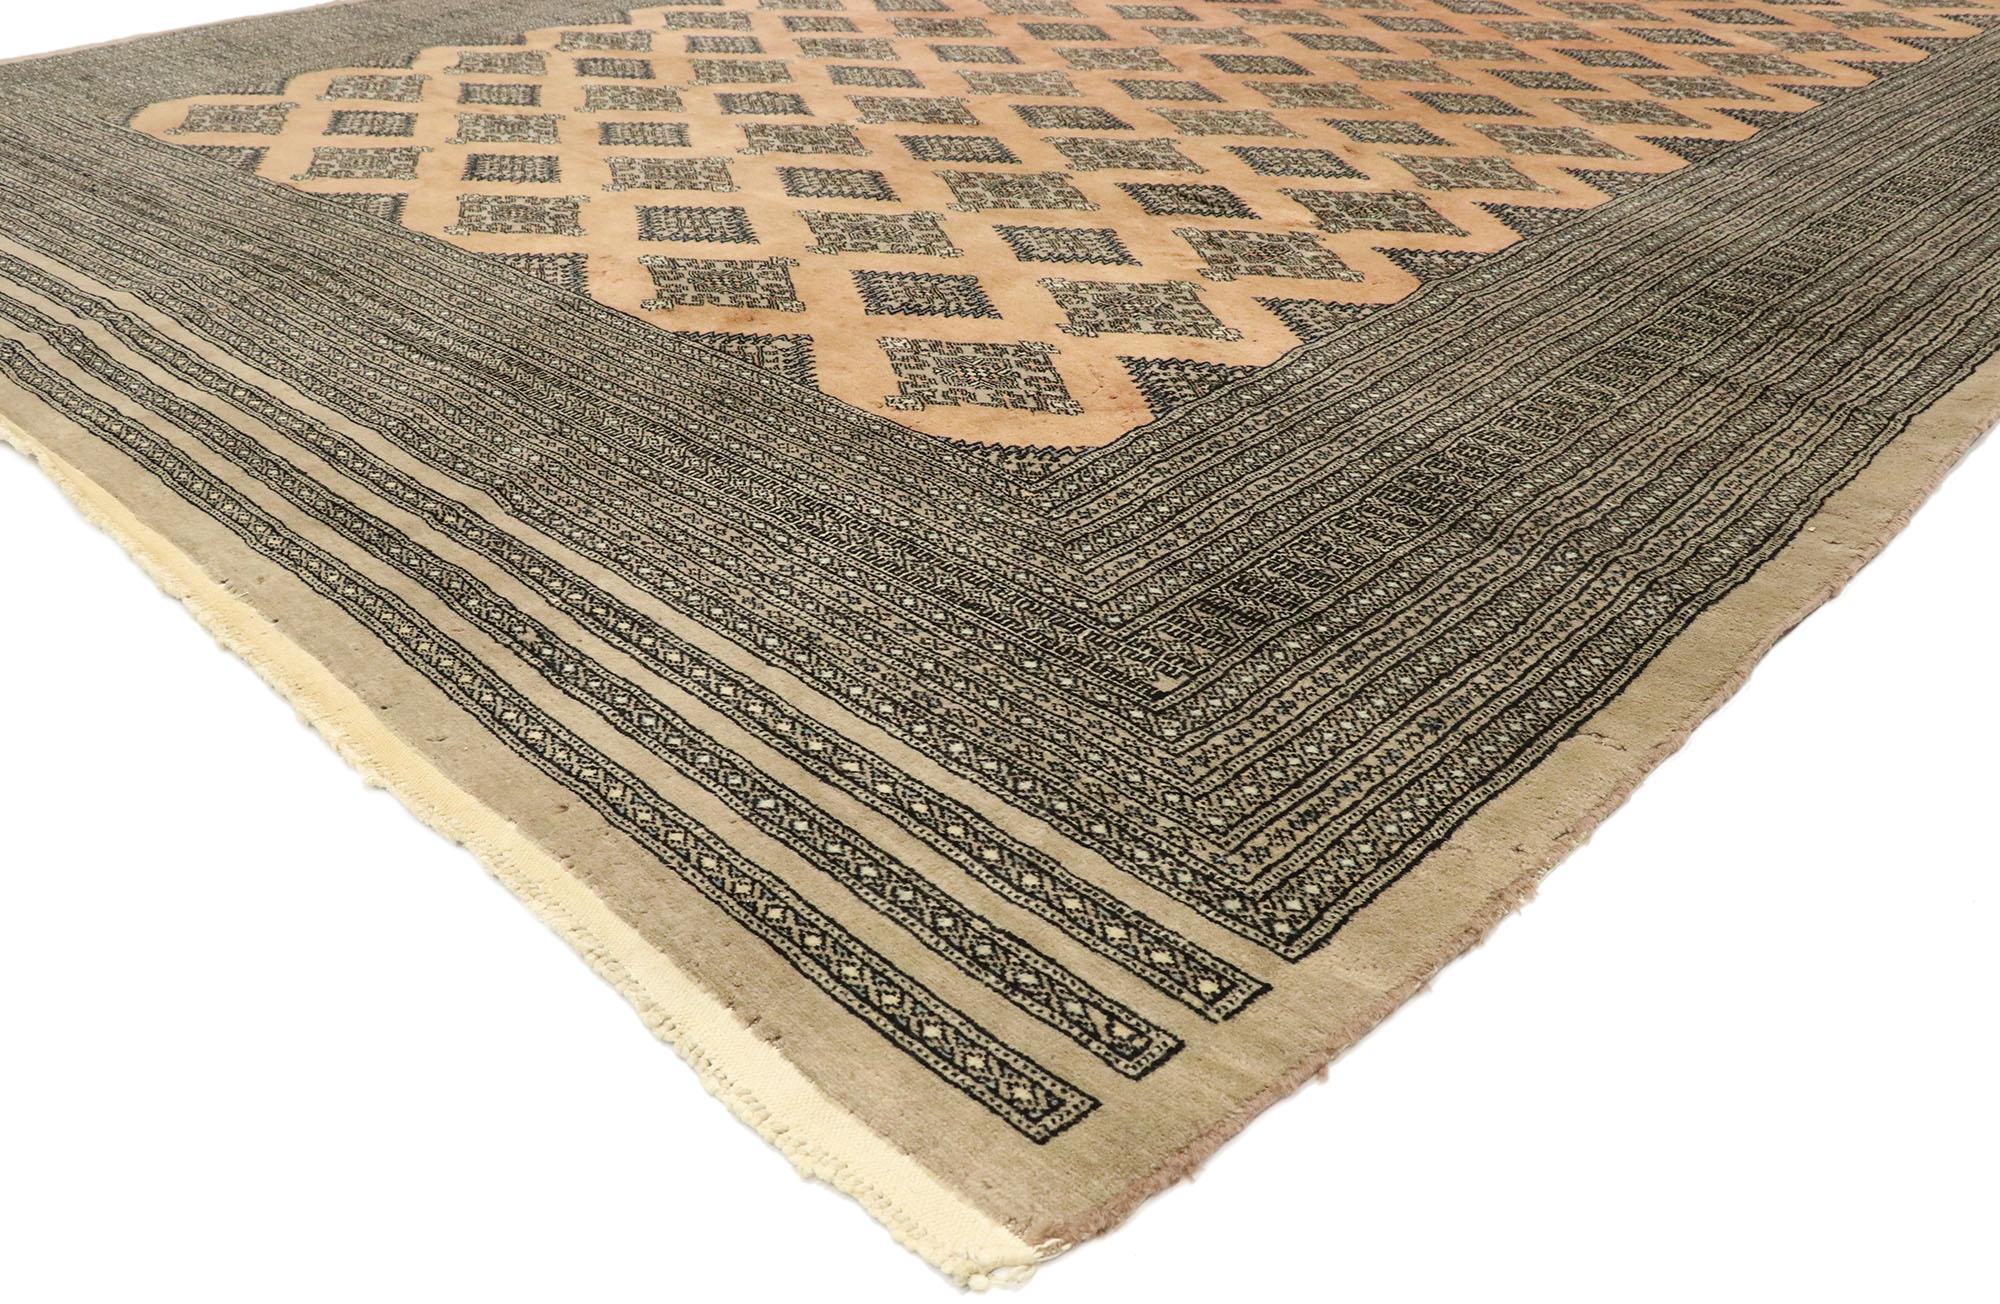 77468 Vintage Pakistani Jaldar Design Bokhara Rug, 09'06 x 12'00. Pakistani Jaldar Design Bokhara rugs are handwoven carpets known for its traditional Bokhara design featuring geometric patterns like the Jaldar motif, characterized by rows of